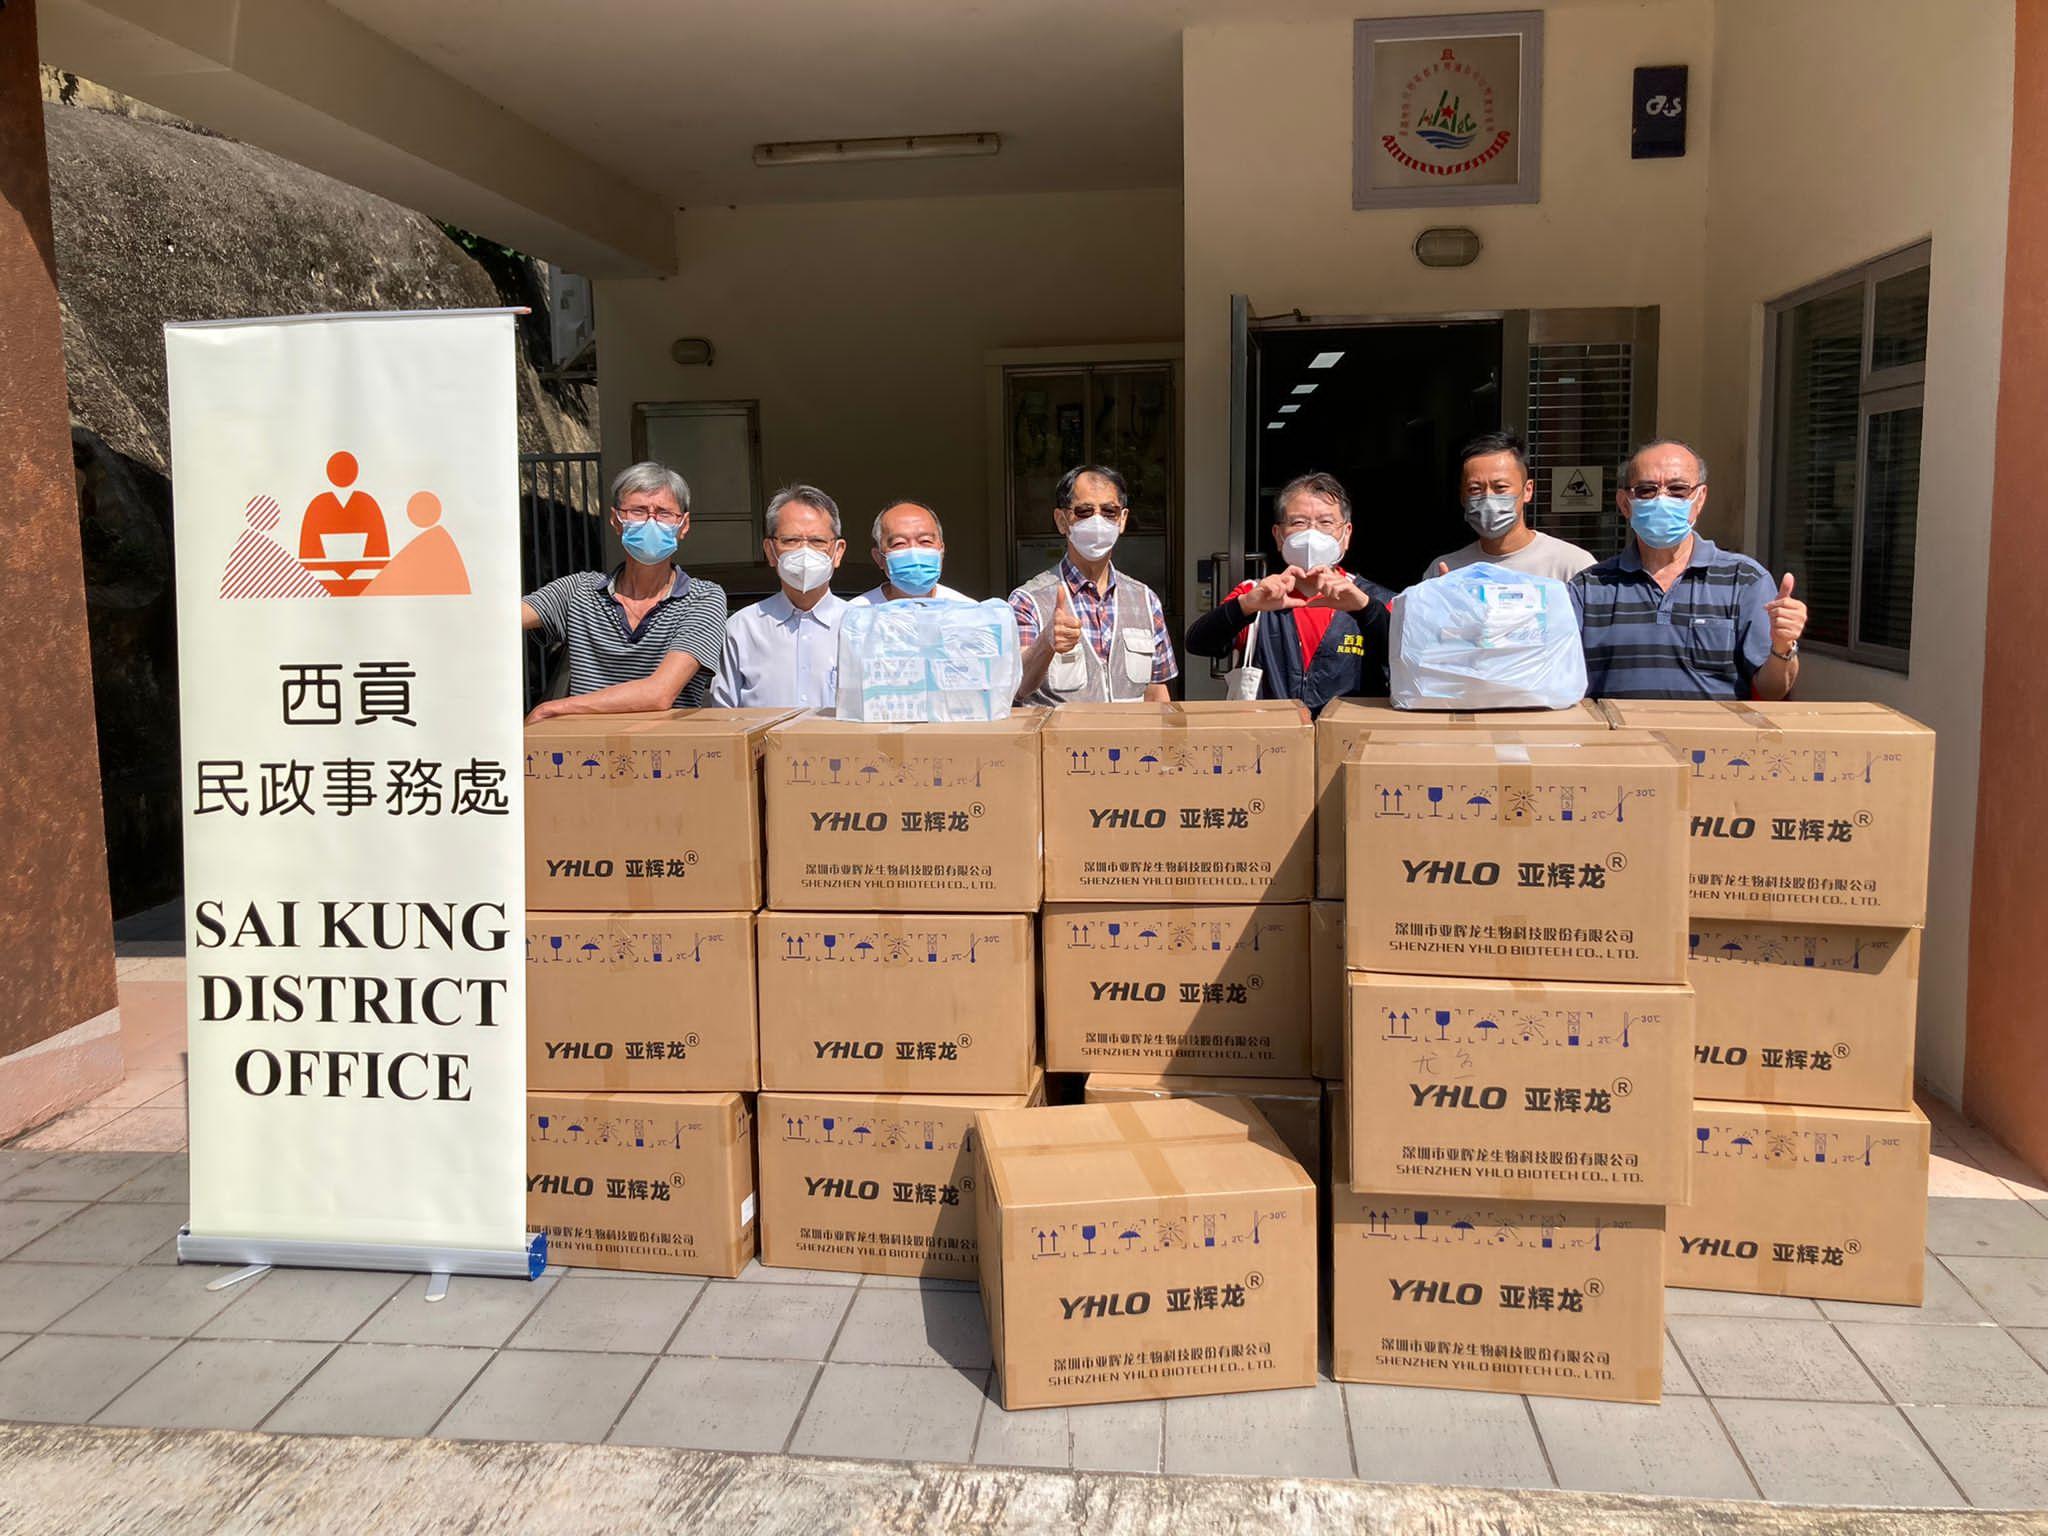 The Sai Kung District Office today (May 6) distributed COVID-19 rapid test kits to households living in Tseung Kwan O Village and Yau Yue Wan Village for voluntary testing through the Hang Hau Rural Committee and the Village Representatives.